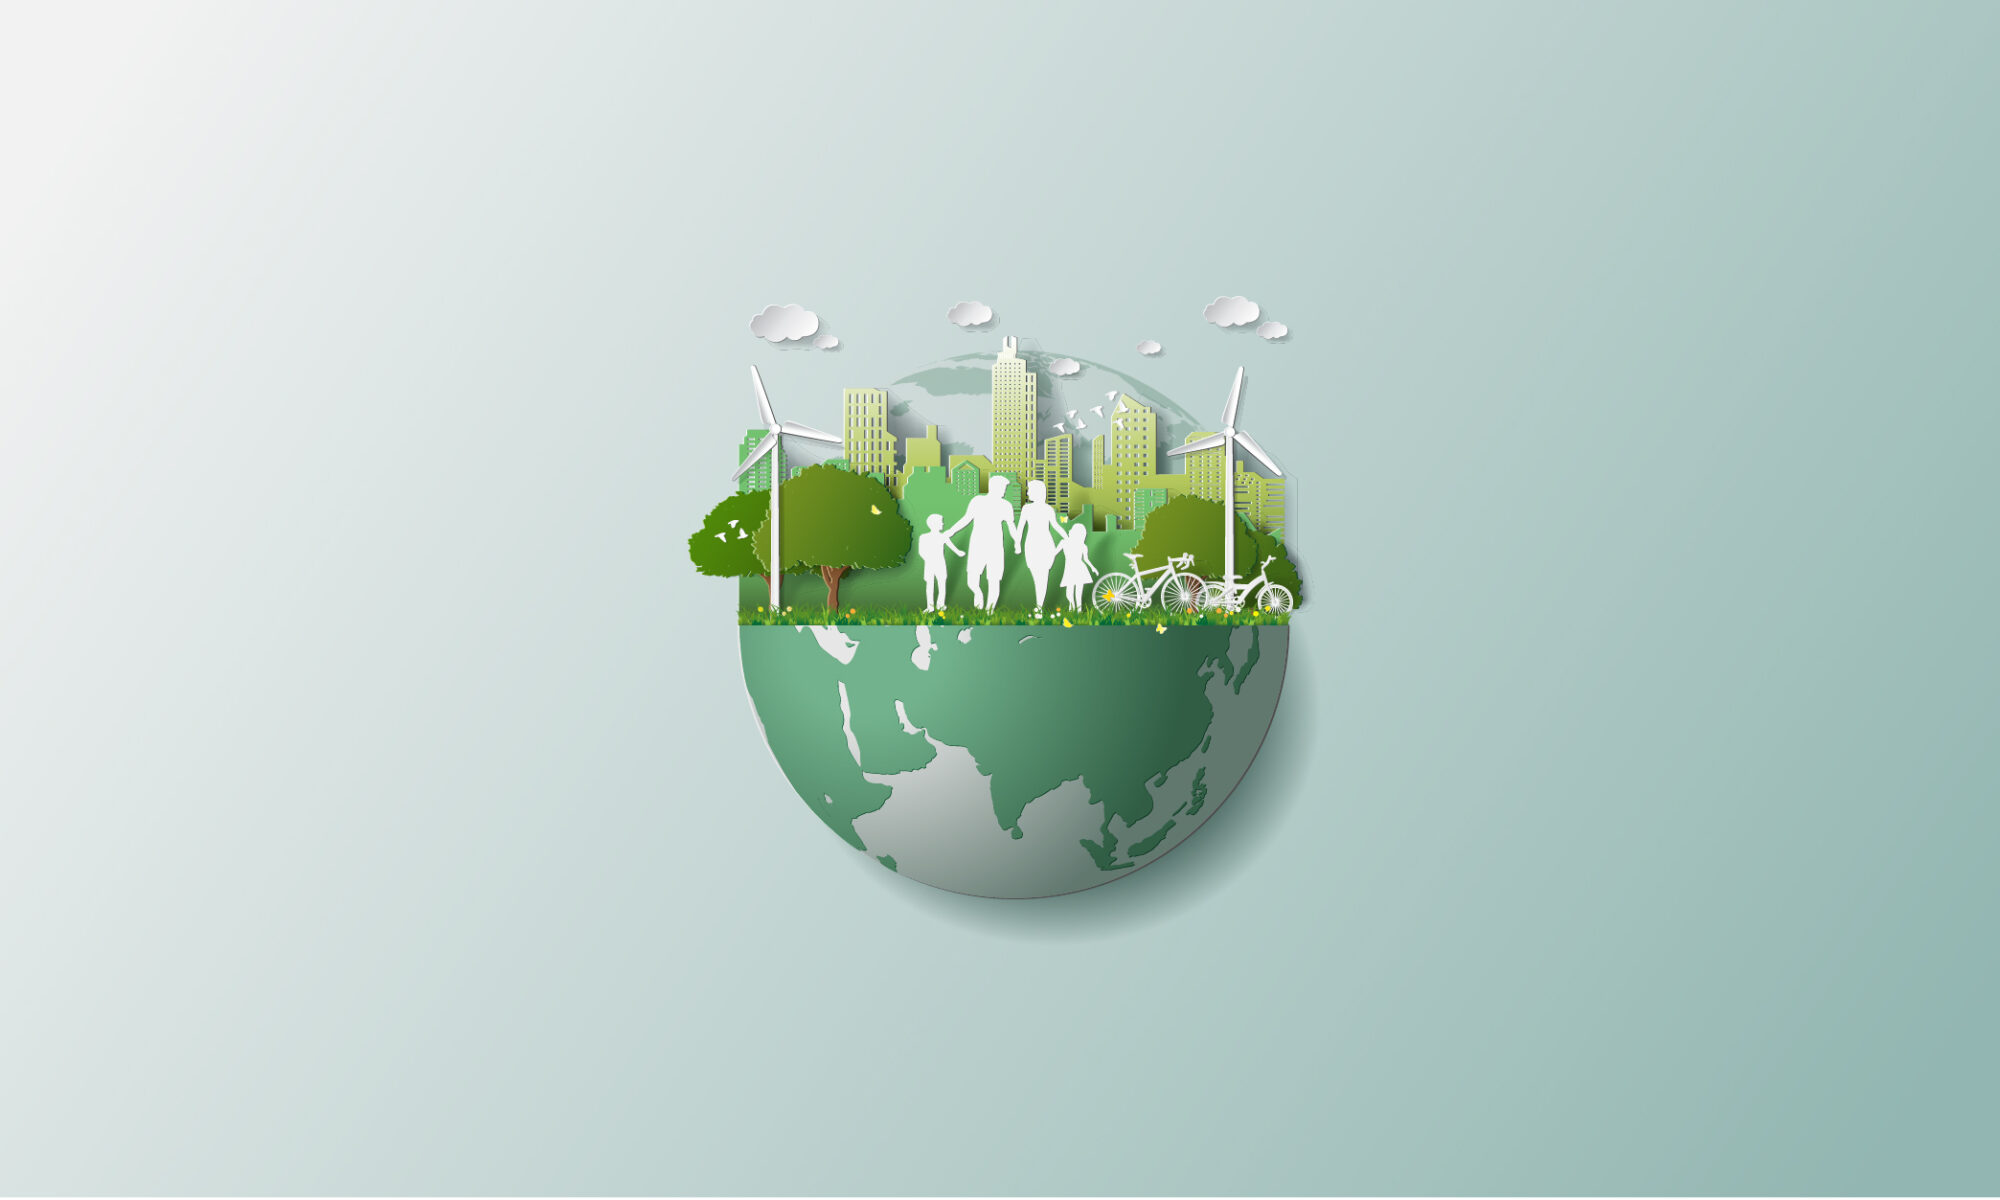 Vector image of a globe with greenery, people walking, and windmills